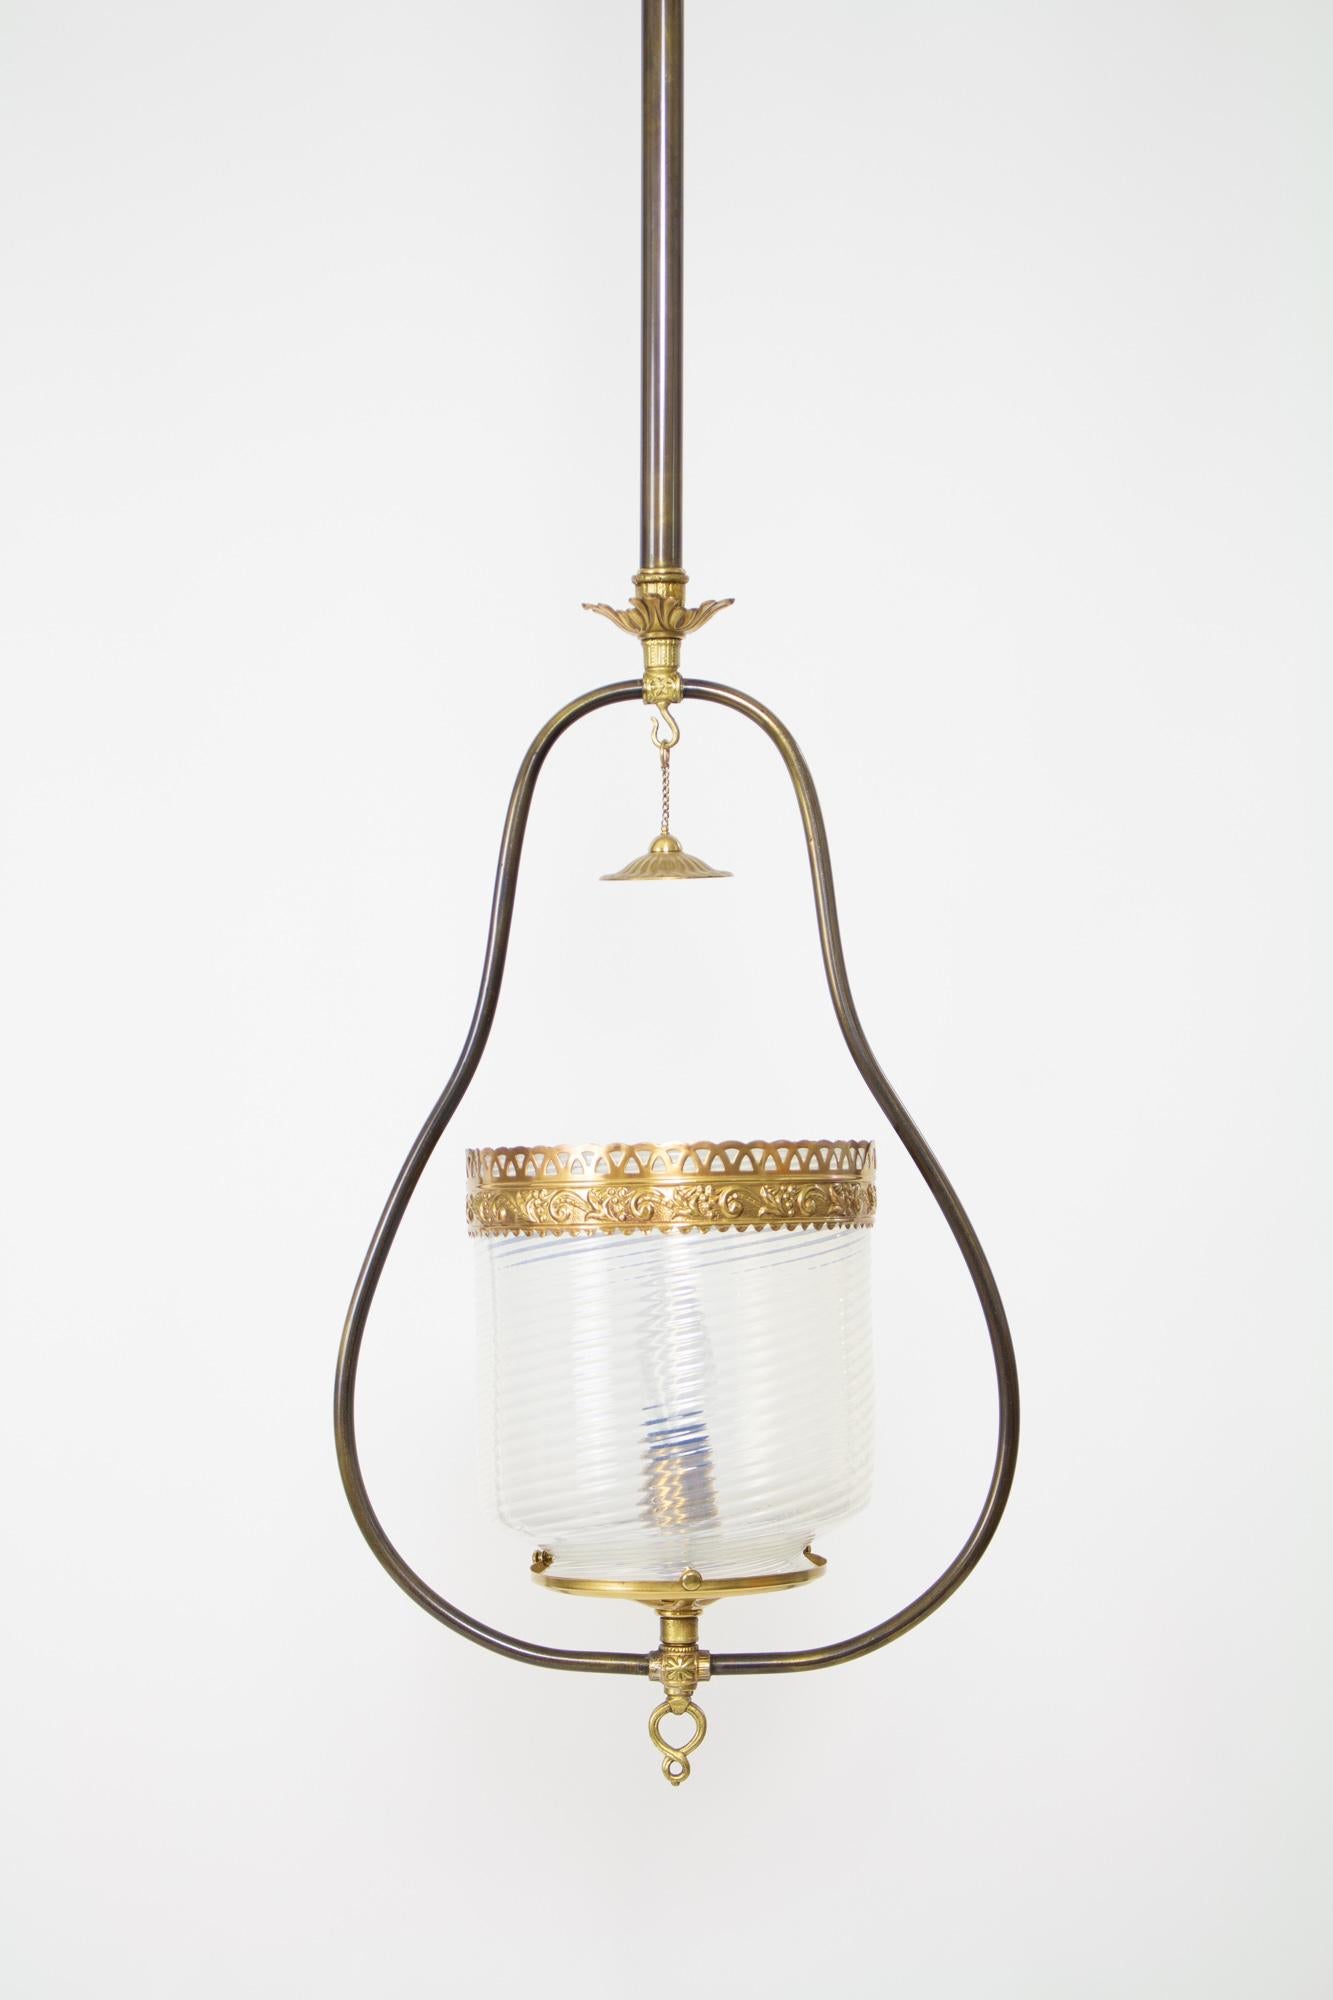 A harp fixture with the original swirled opal glass and smoke bell. Brass filigree crown on glass. Tubing has a dark patina and contrasts with the bright brass detail elements. This piece was originally lit with a gas burner, and has been